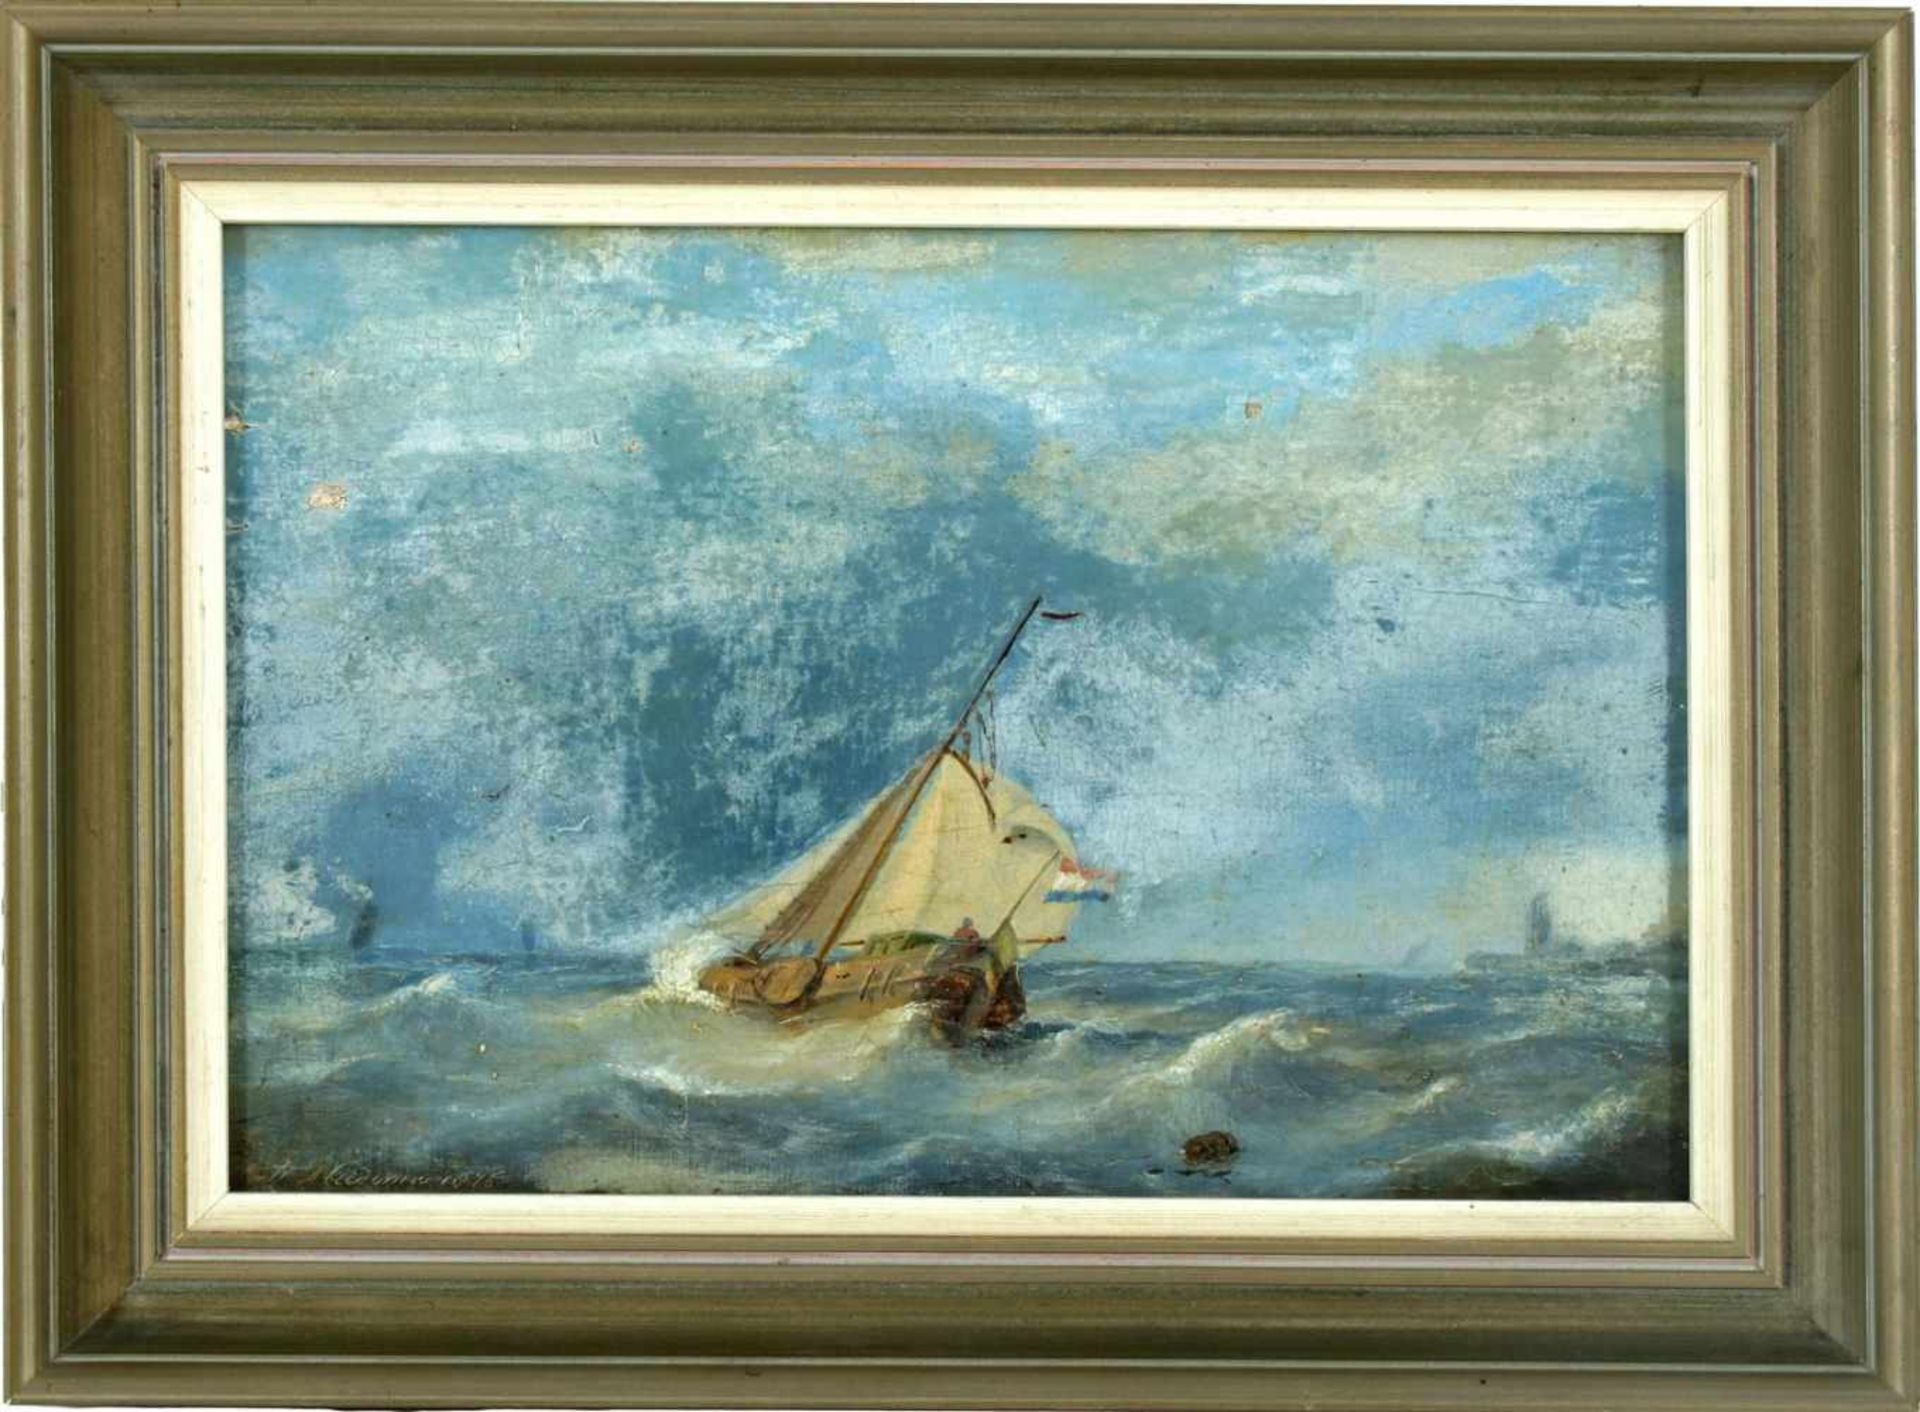 Unclear signed, Dutch cutter on turbulent sea, 1876, panel 26x18 cm